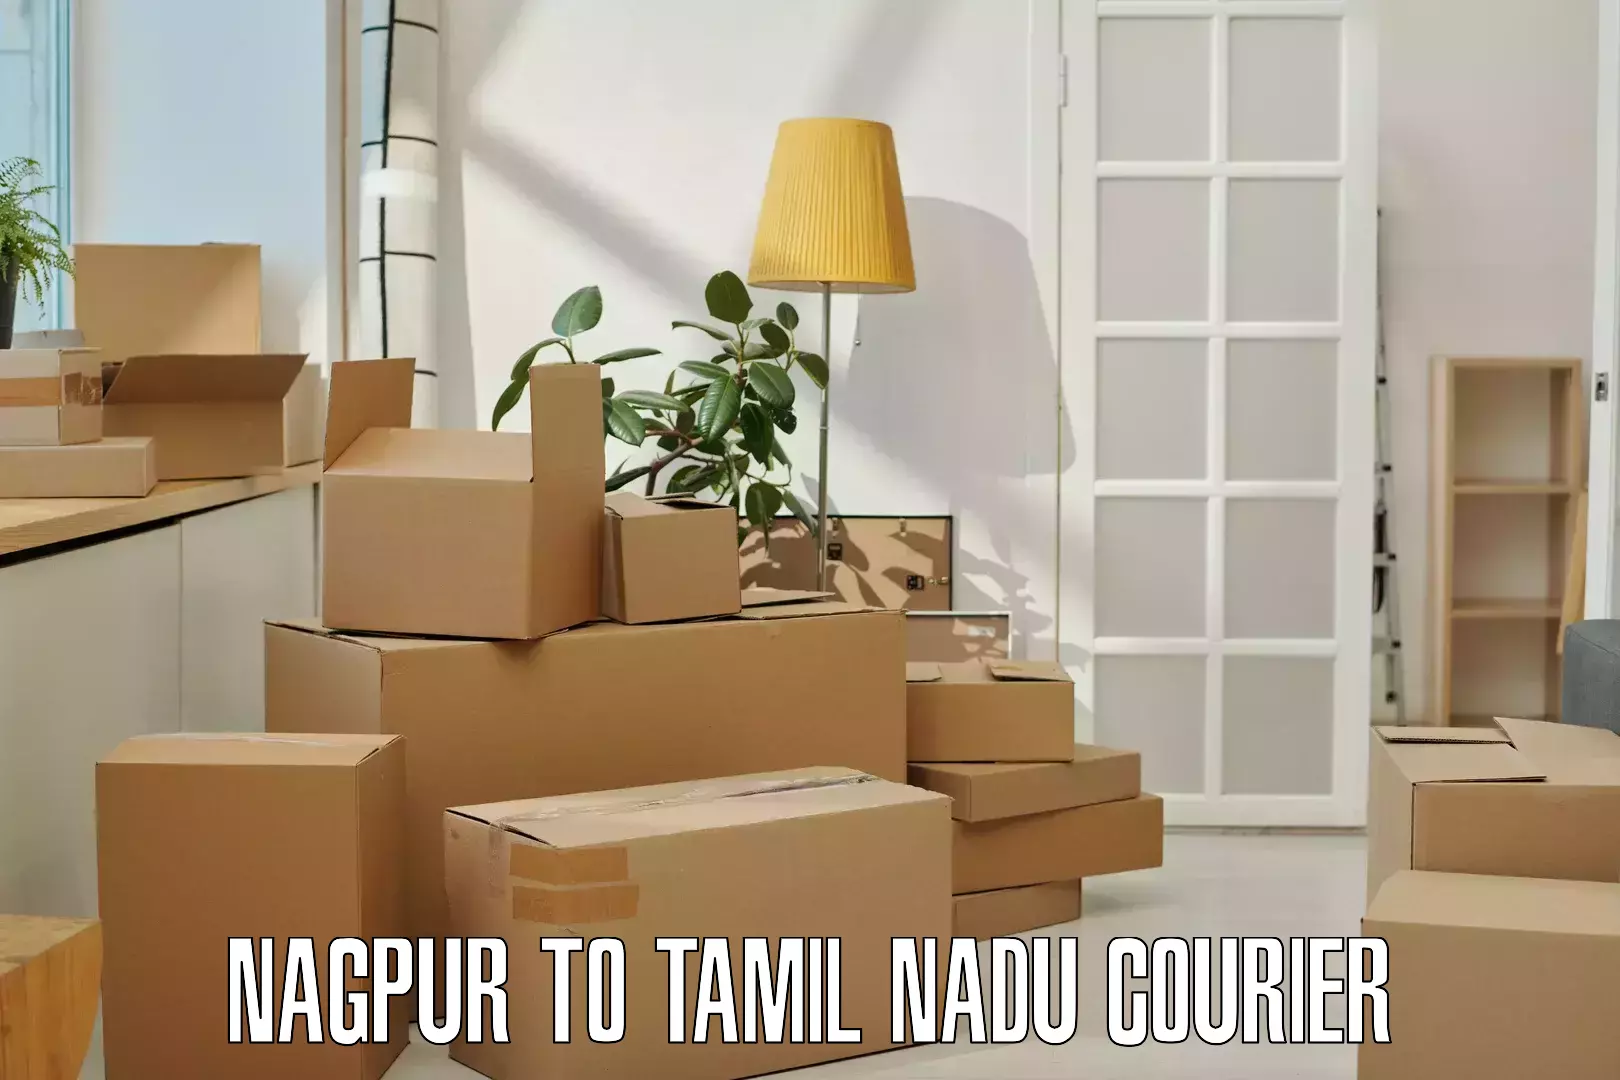 24/7 courier service Nagpur to Ennore Port Chennai